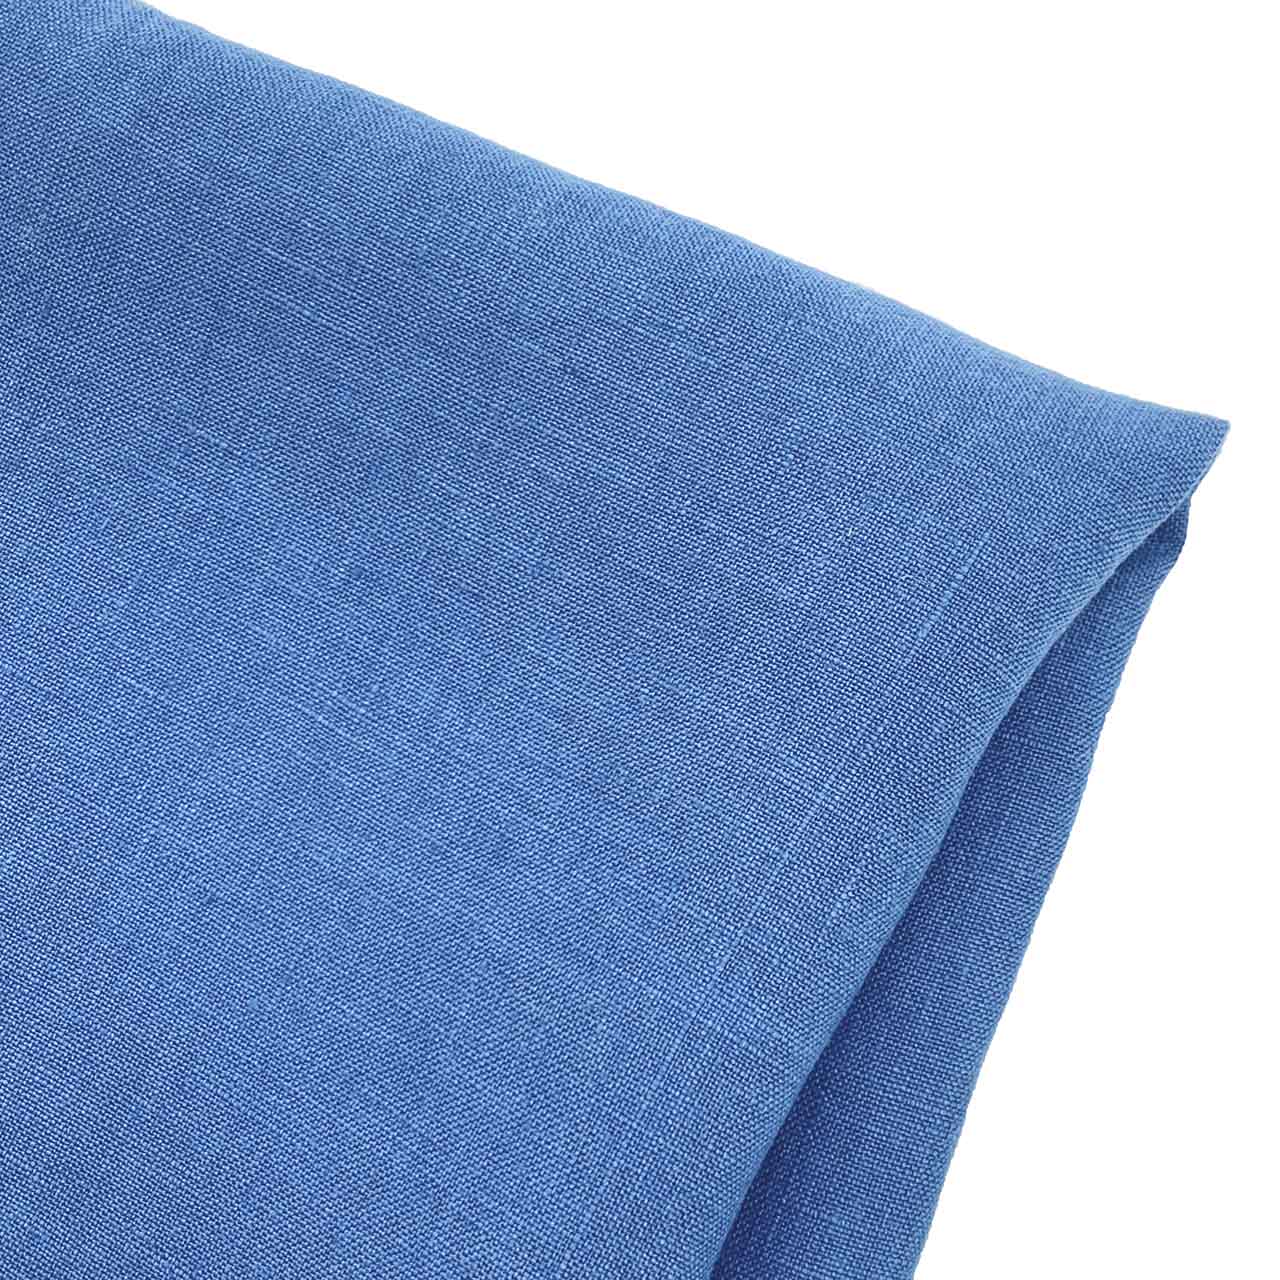 Heavy Weight Linen Sandwashed | Cobalt Blue – Fabric Collection